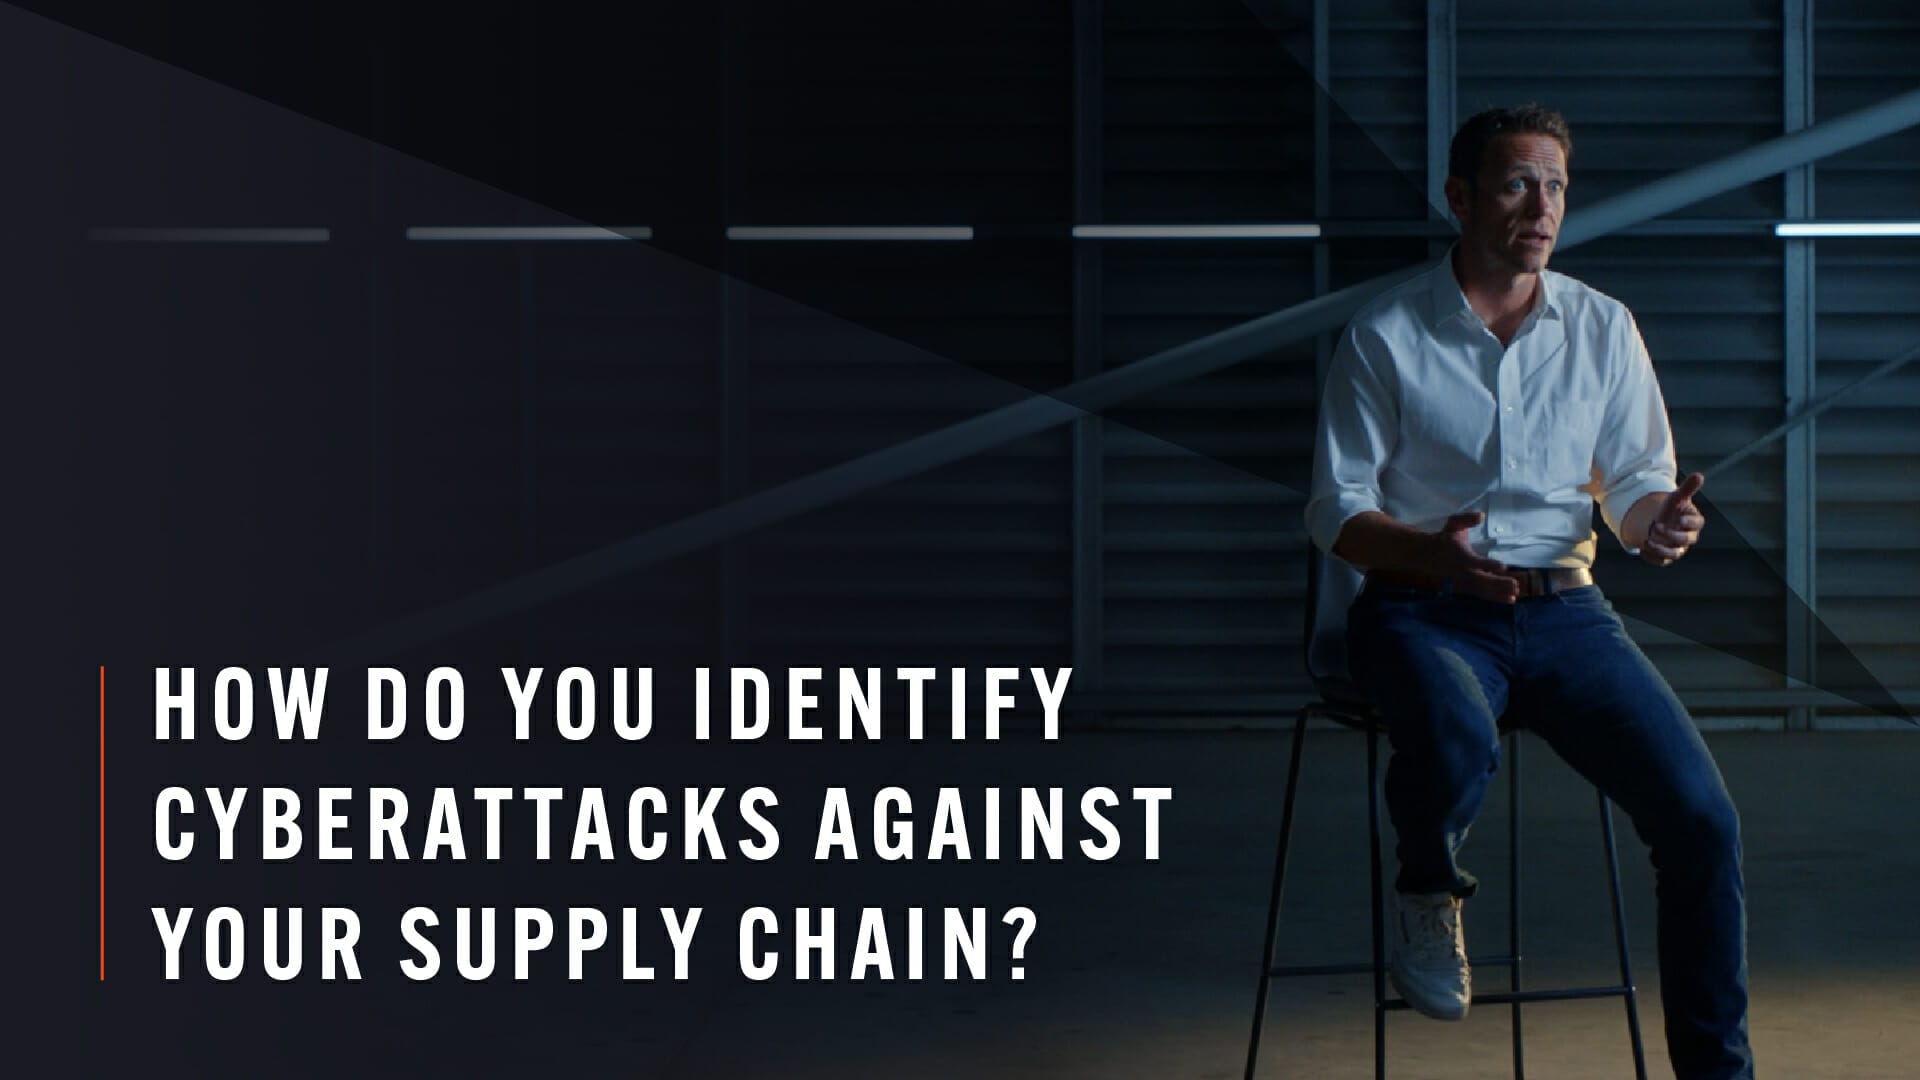 How do you identify cyberattacks against your supply chain?